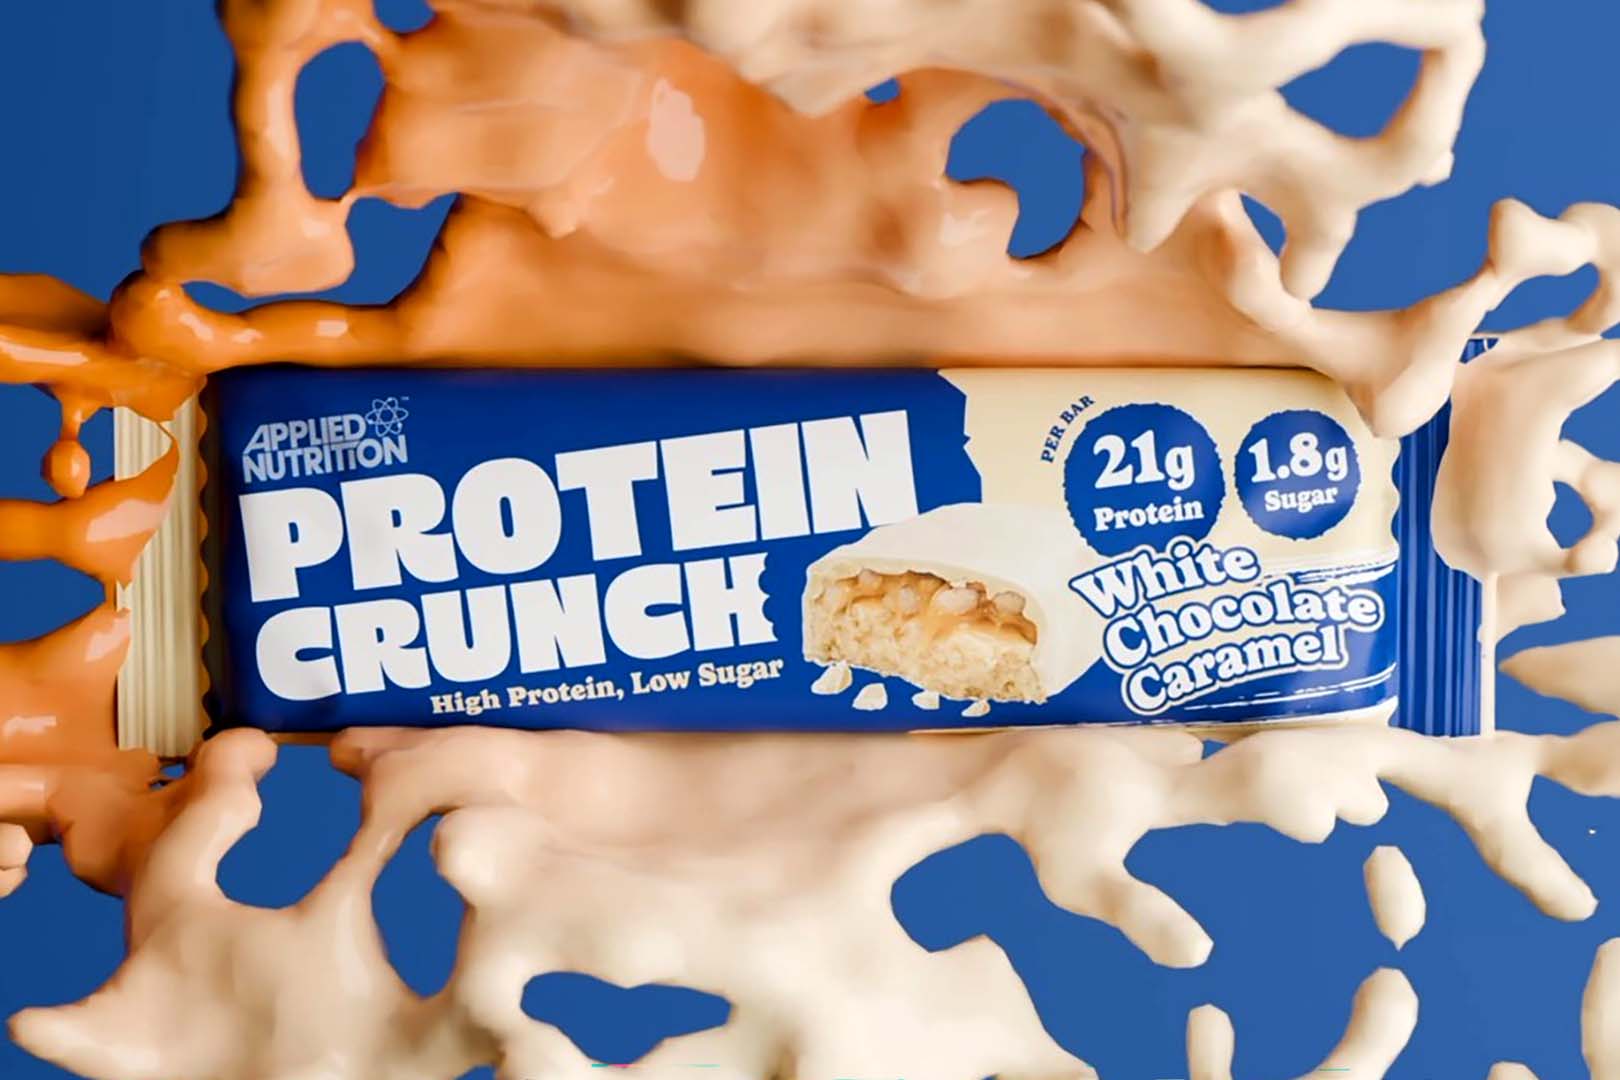 Applied Improved Crunch Protein Bar